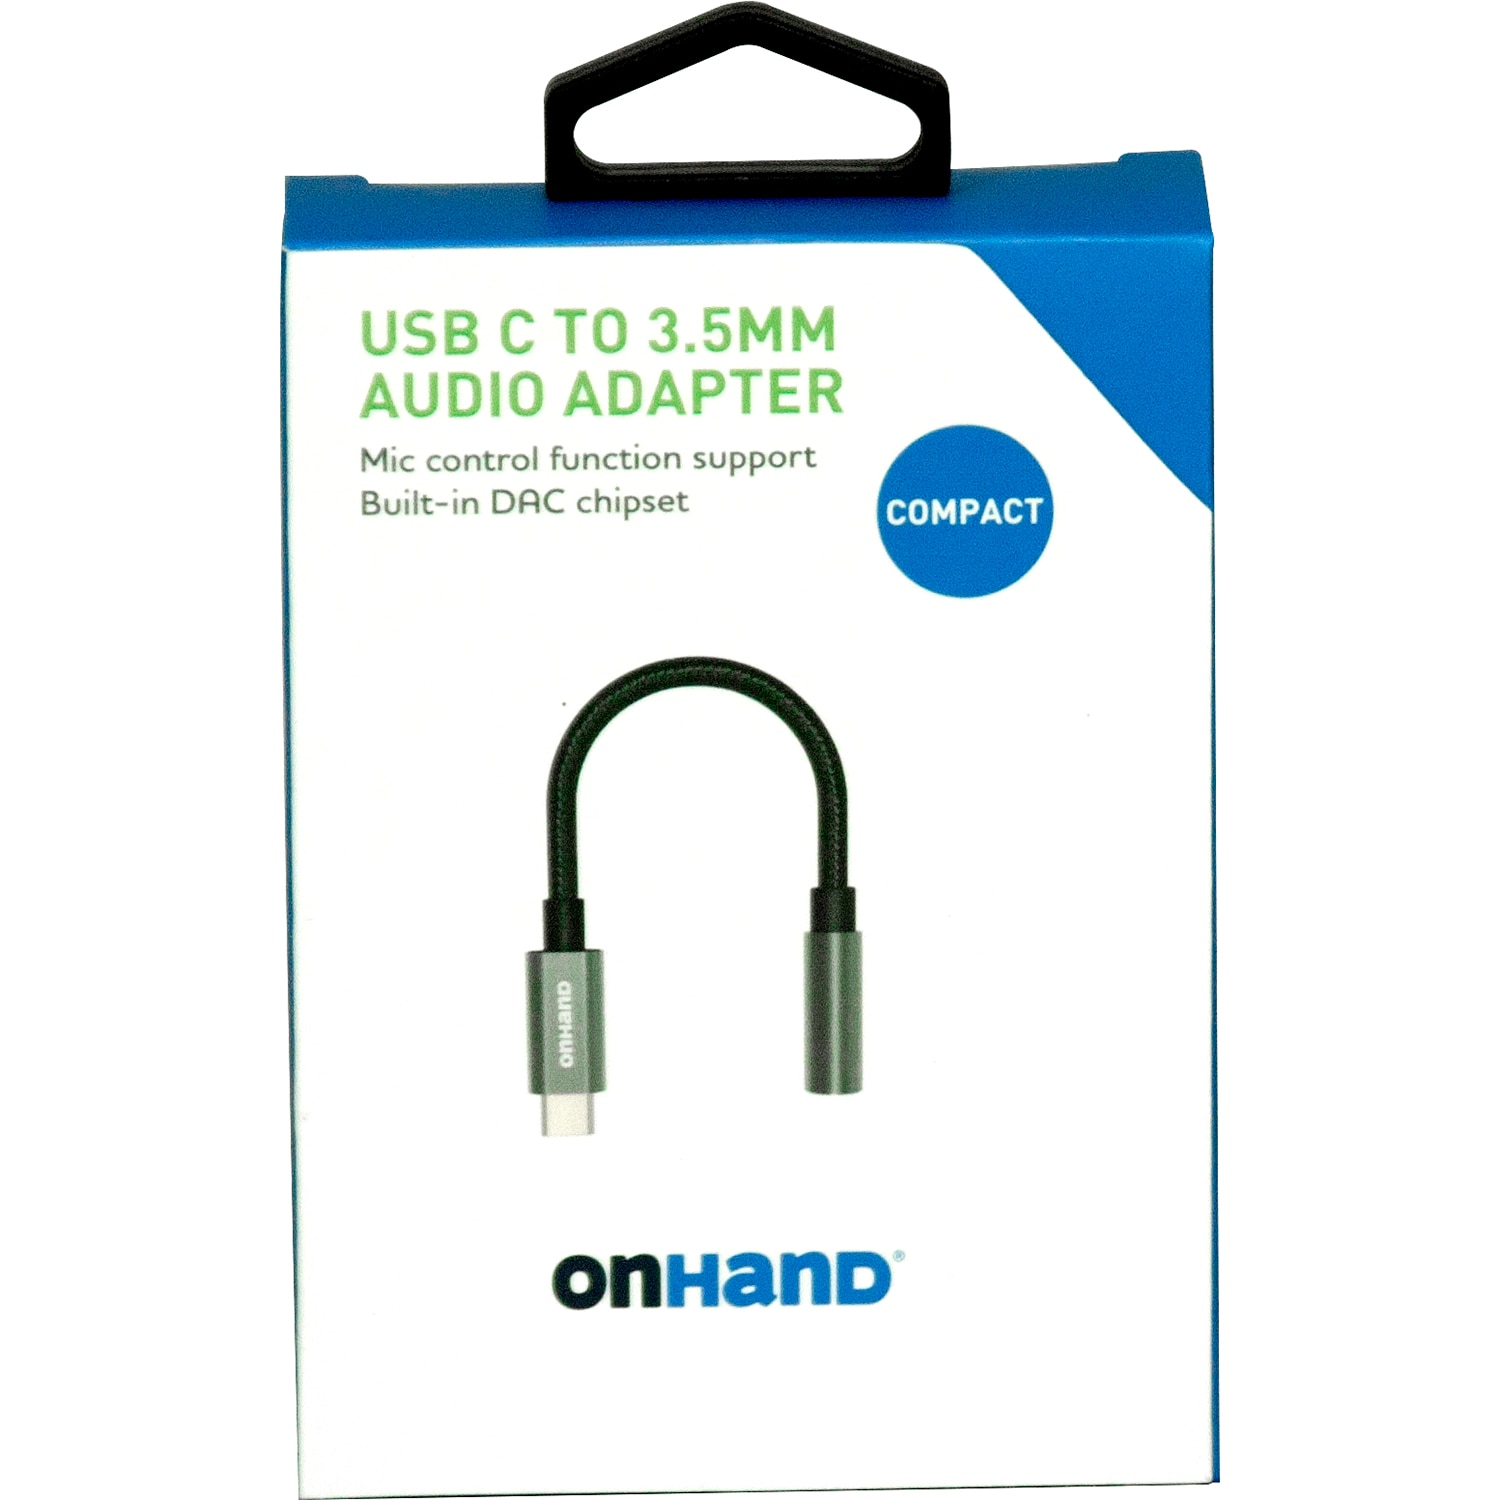 OnHand Audio Adapter USB-C to 3.5mm, Black